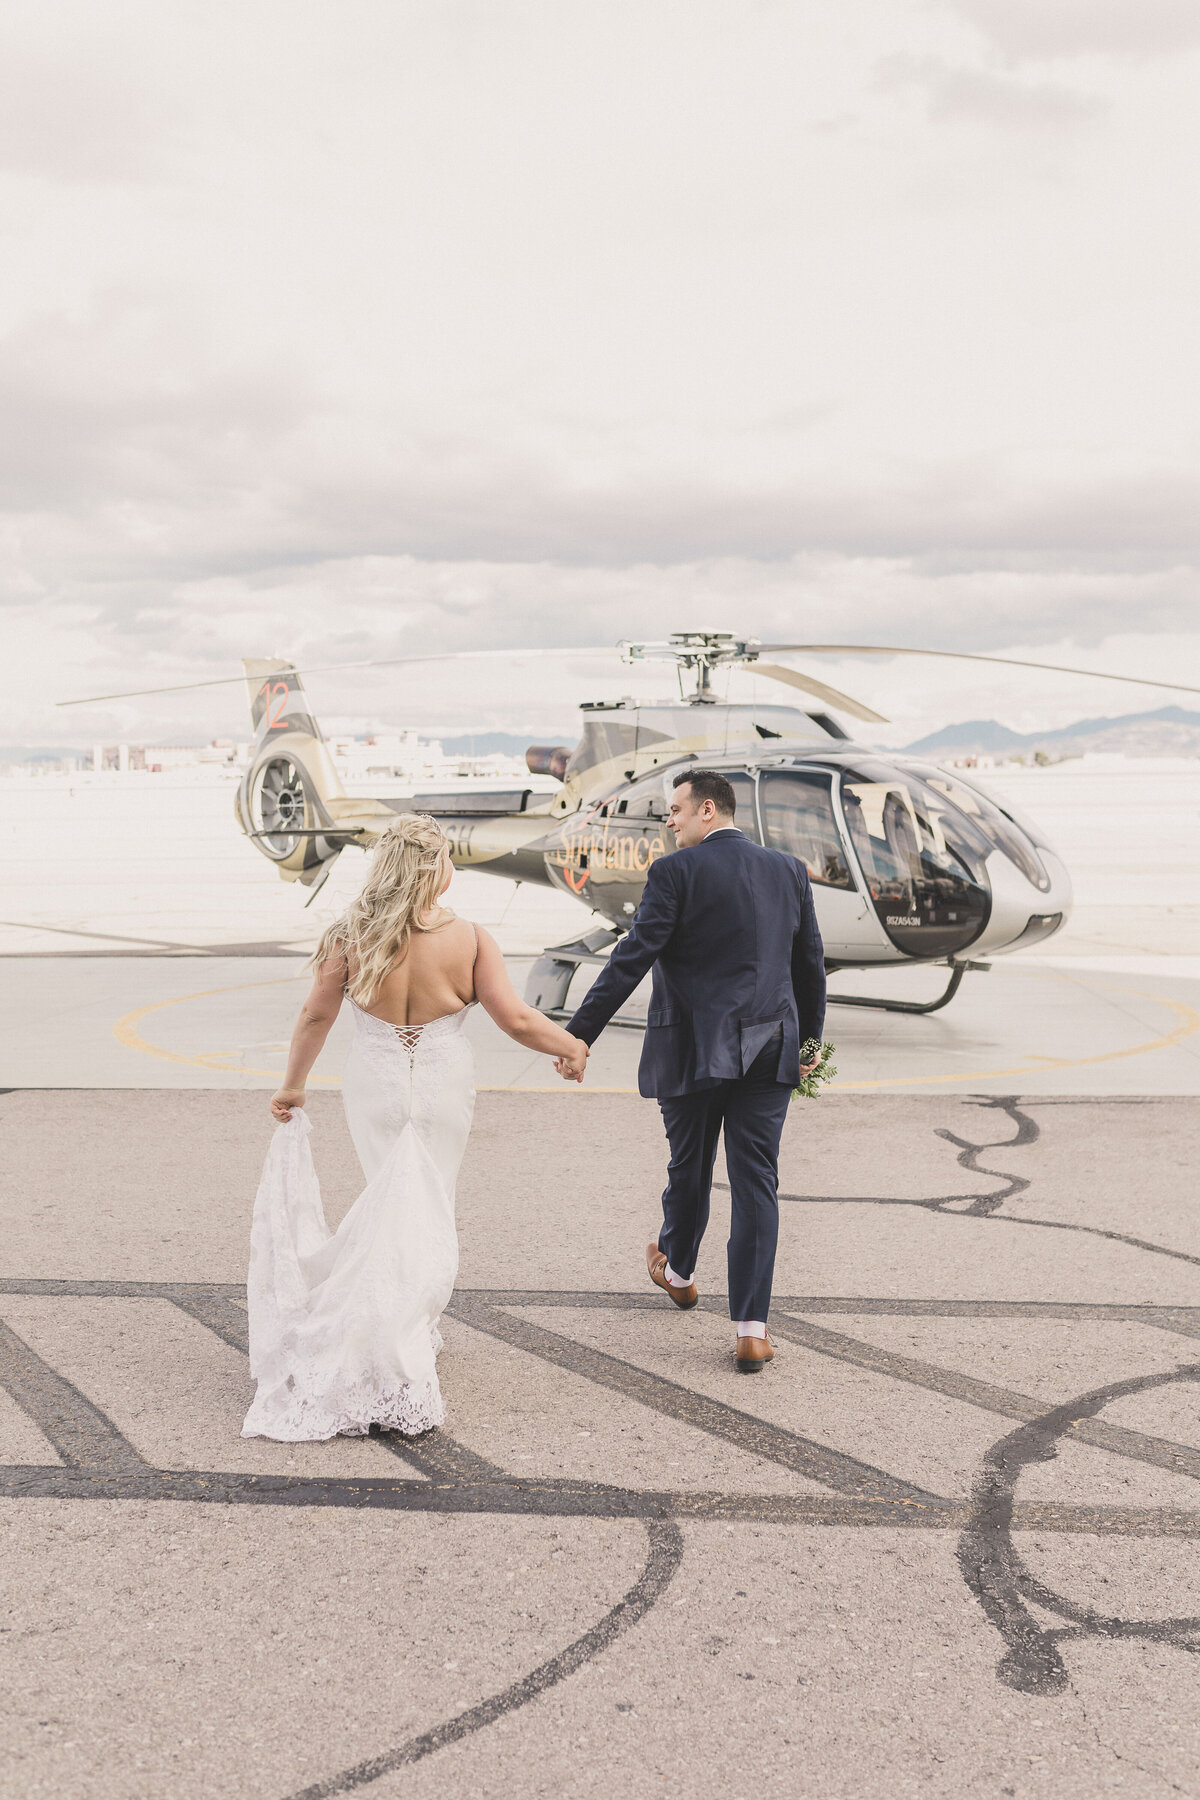 Helicopter Adventure Elopement | Taylor Made Photography